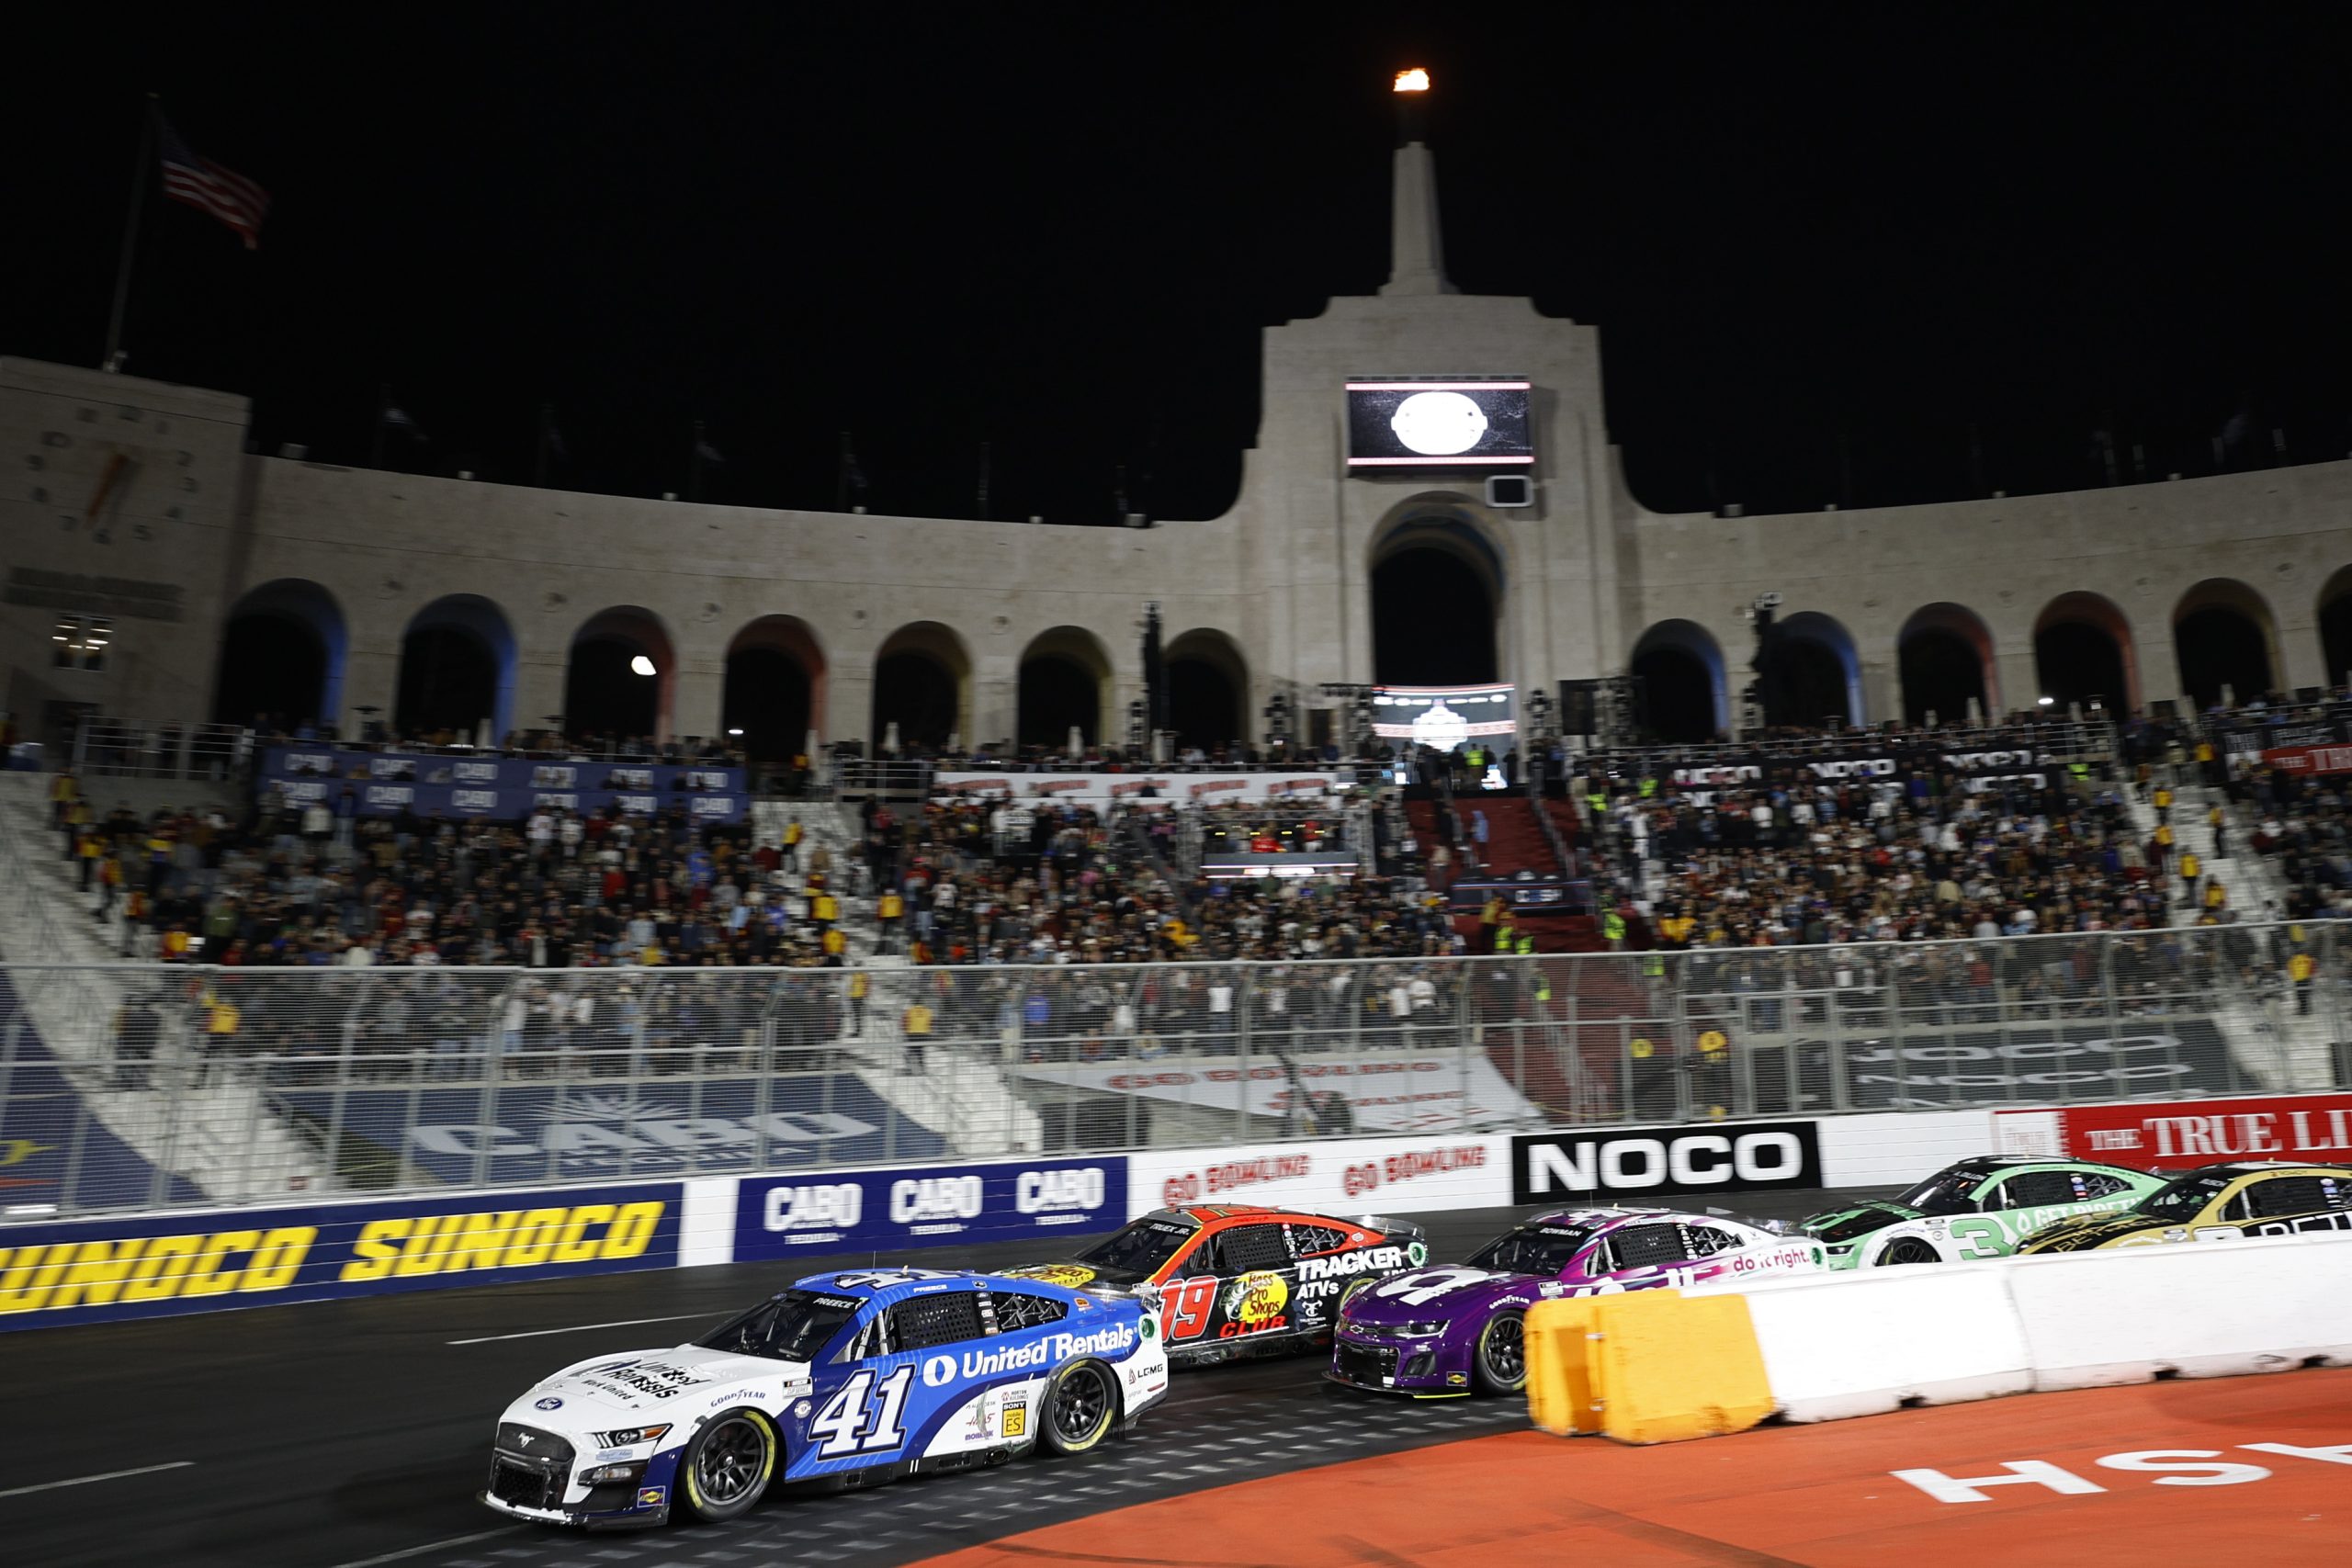 Ryan Preece, driver of the #41 United Rentals Ford, drives during the NASCAR Clash at the Coliseum at Los Angeles Memorial Coliseum on February 05, 2023 in Los Angeles, California.